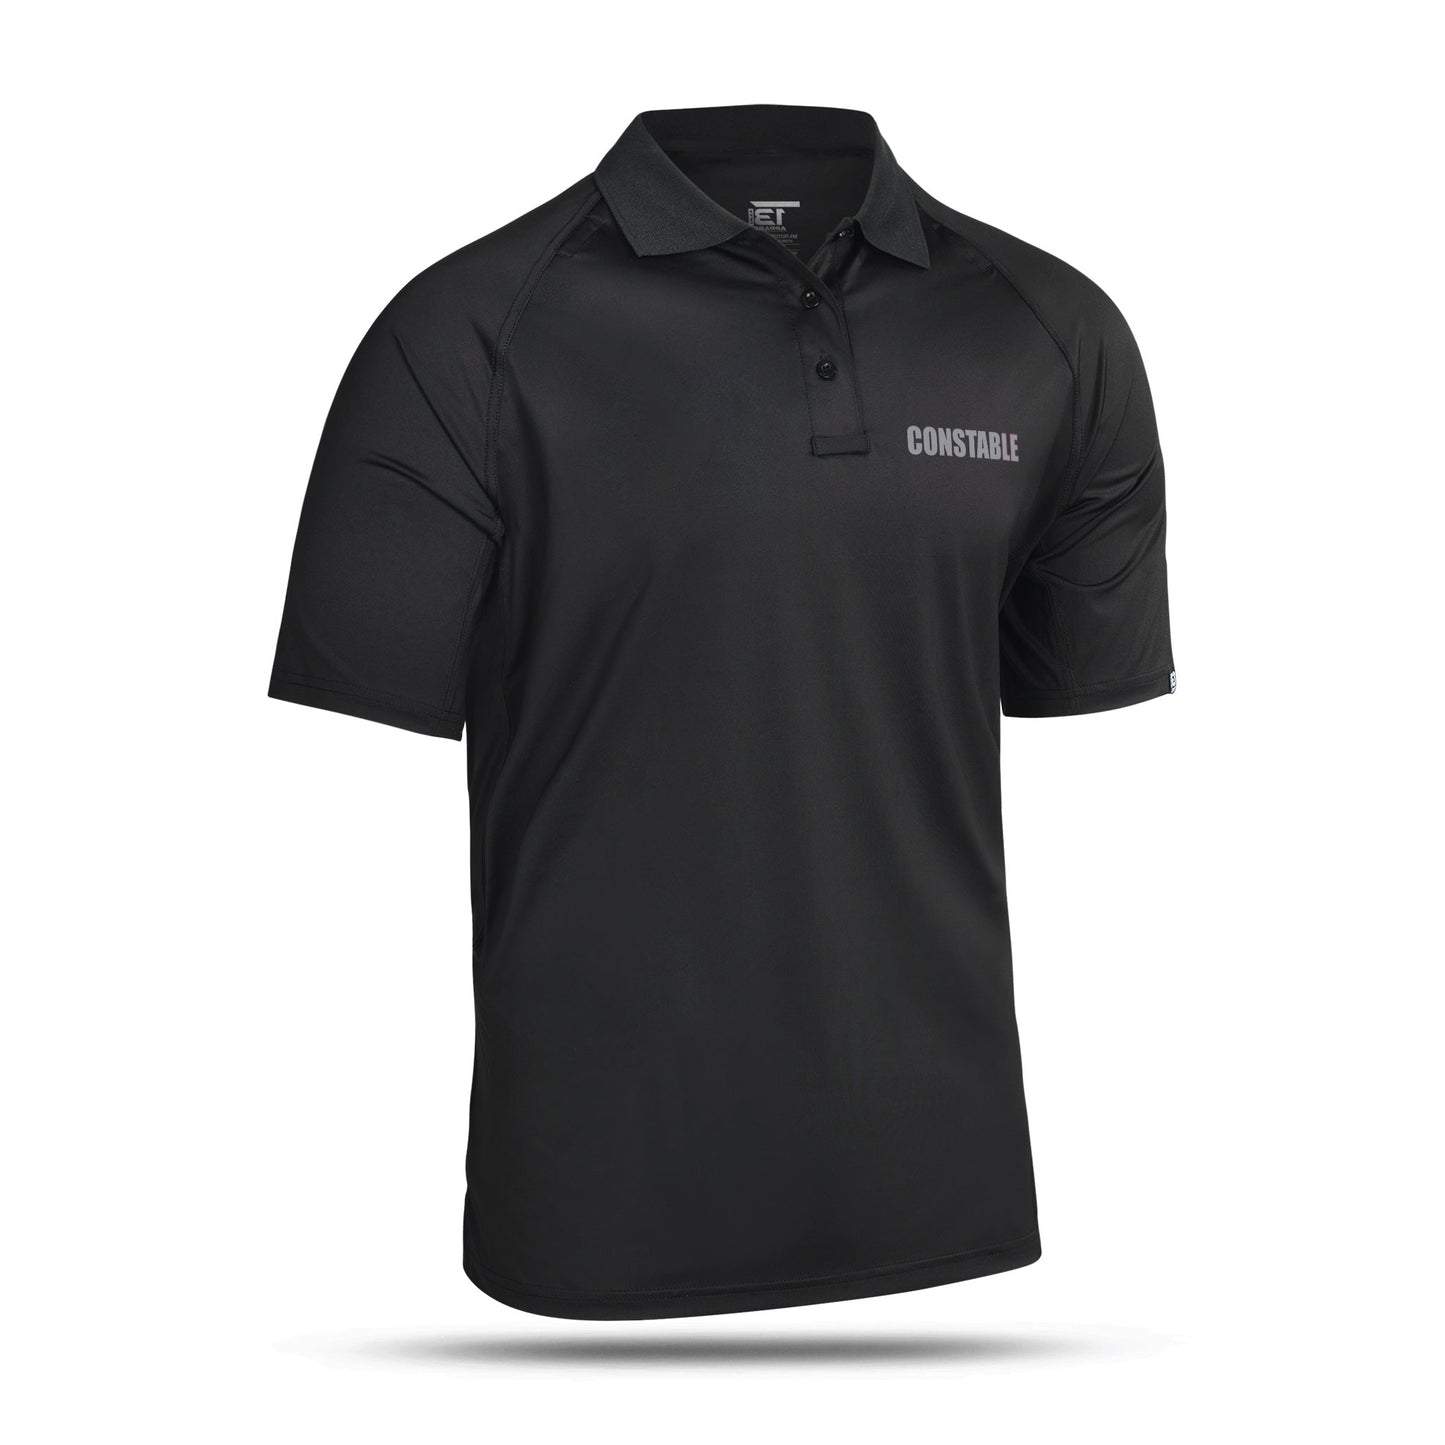 [CONSTABLE] Performance Polo [BLK/GRY]-13 Fifty Apparel